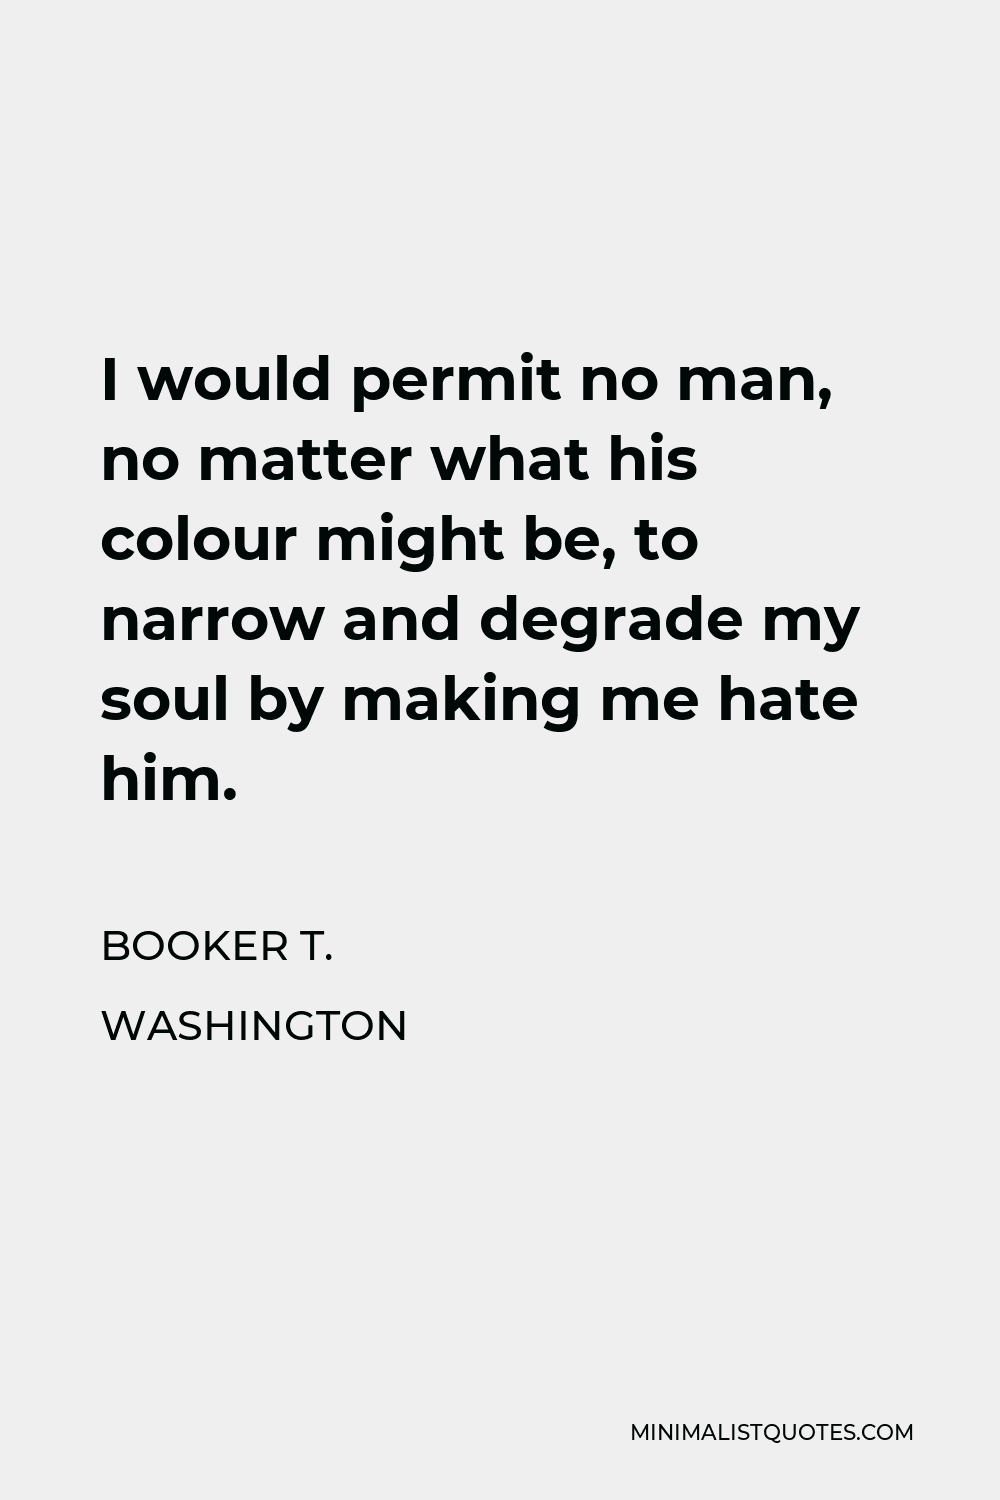 Booker T. Washington Quote - I would permit no man, no matter what his colour might be, to narrow and degrade my soul by making me hate him.